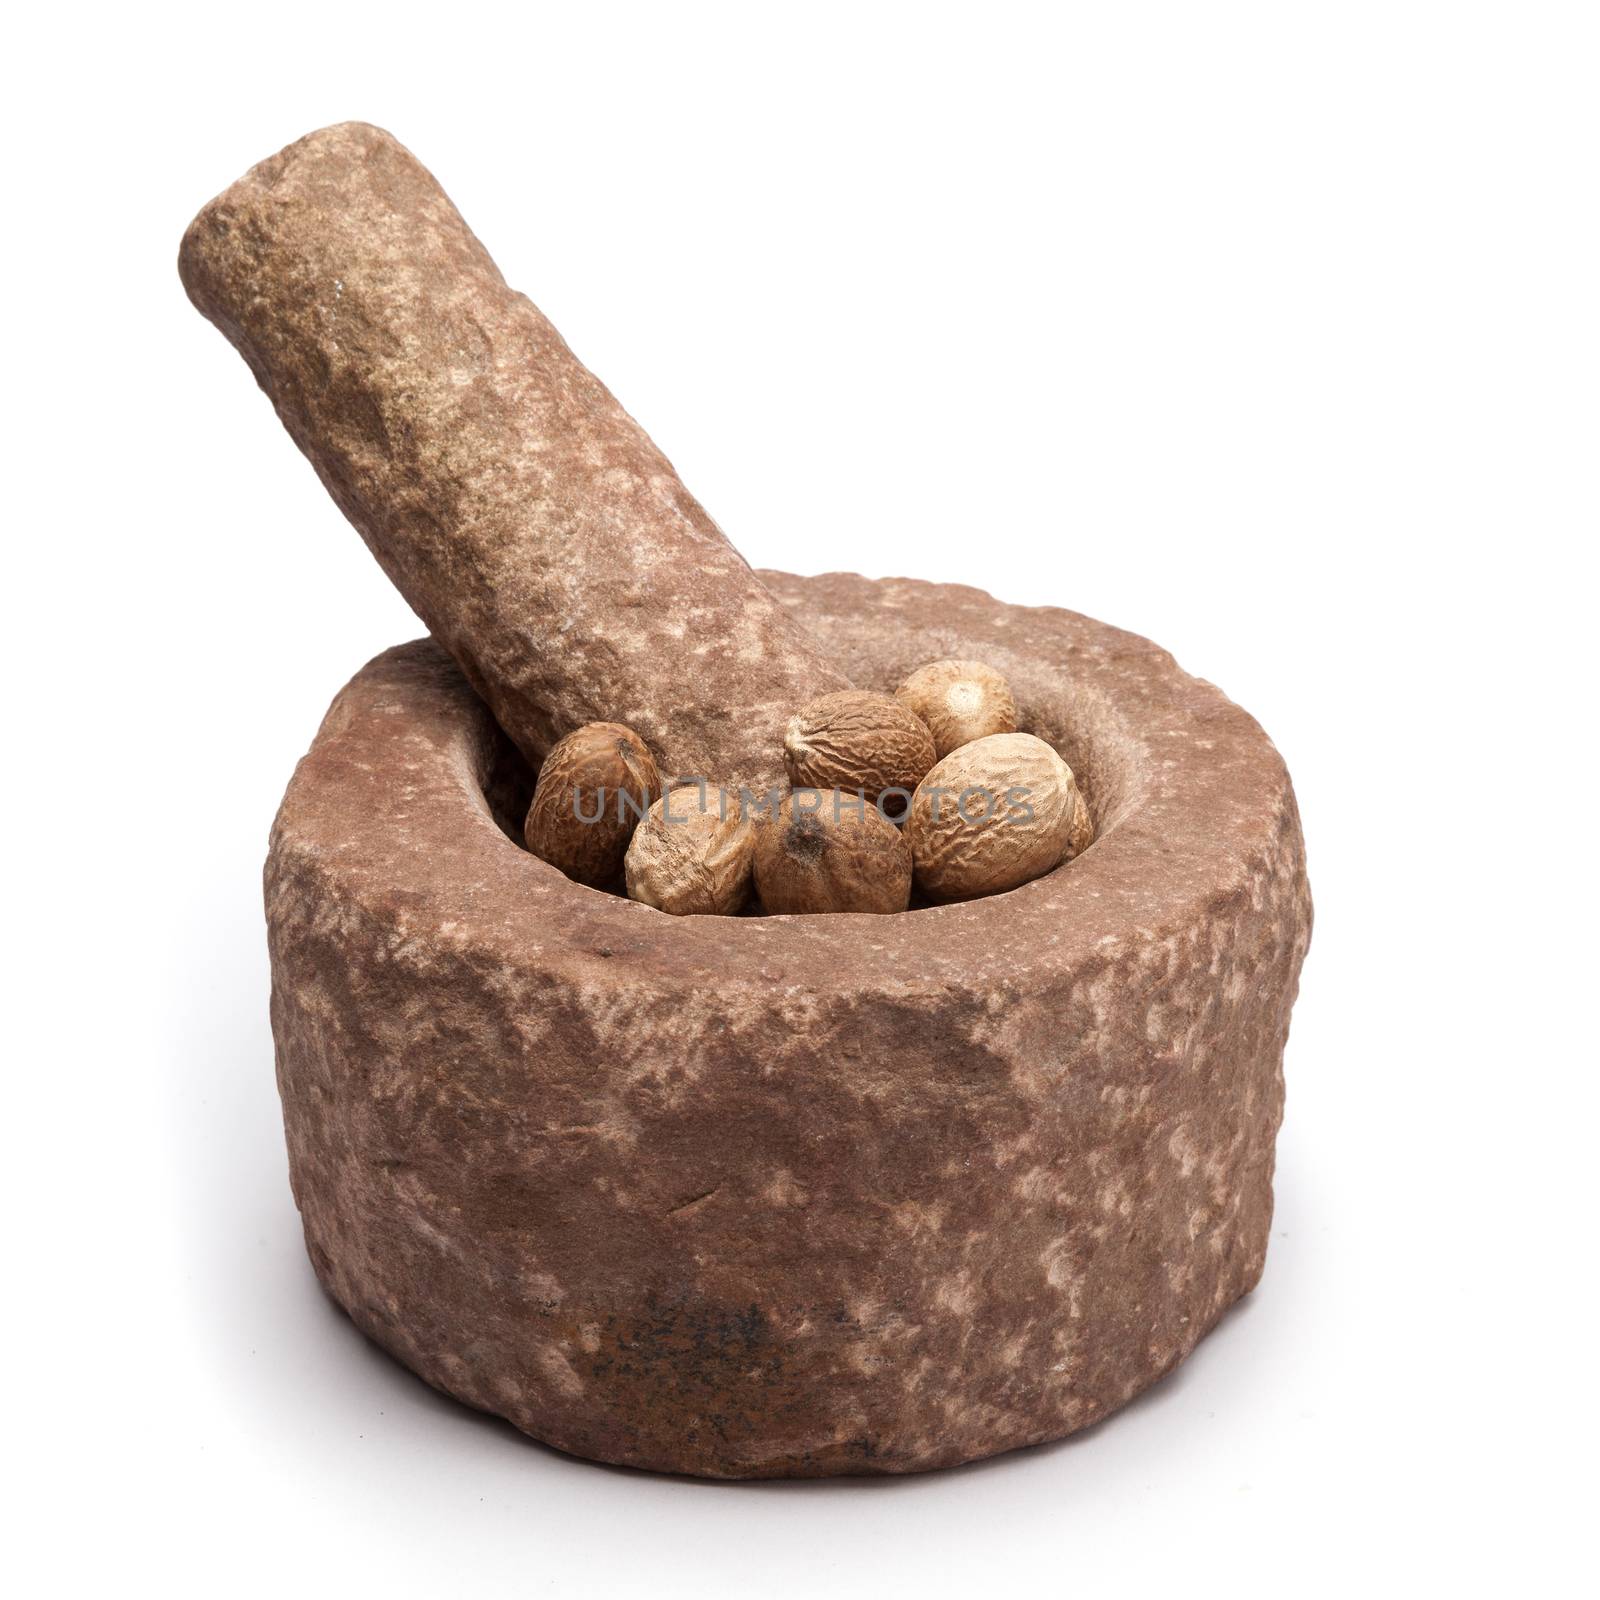 Organic Nutmeg Seed or Jaiphal (Myristica fragrans) in mortar with pestle, isolated on white background.